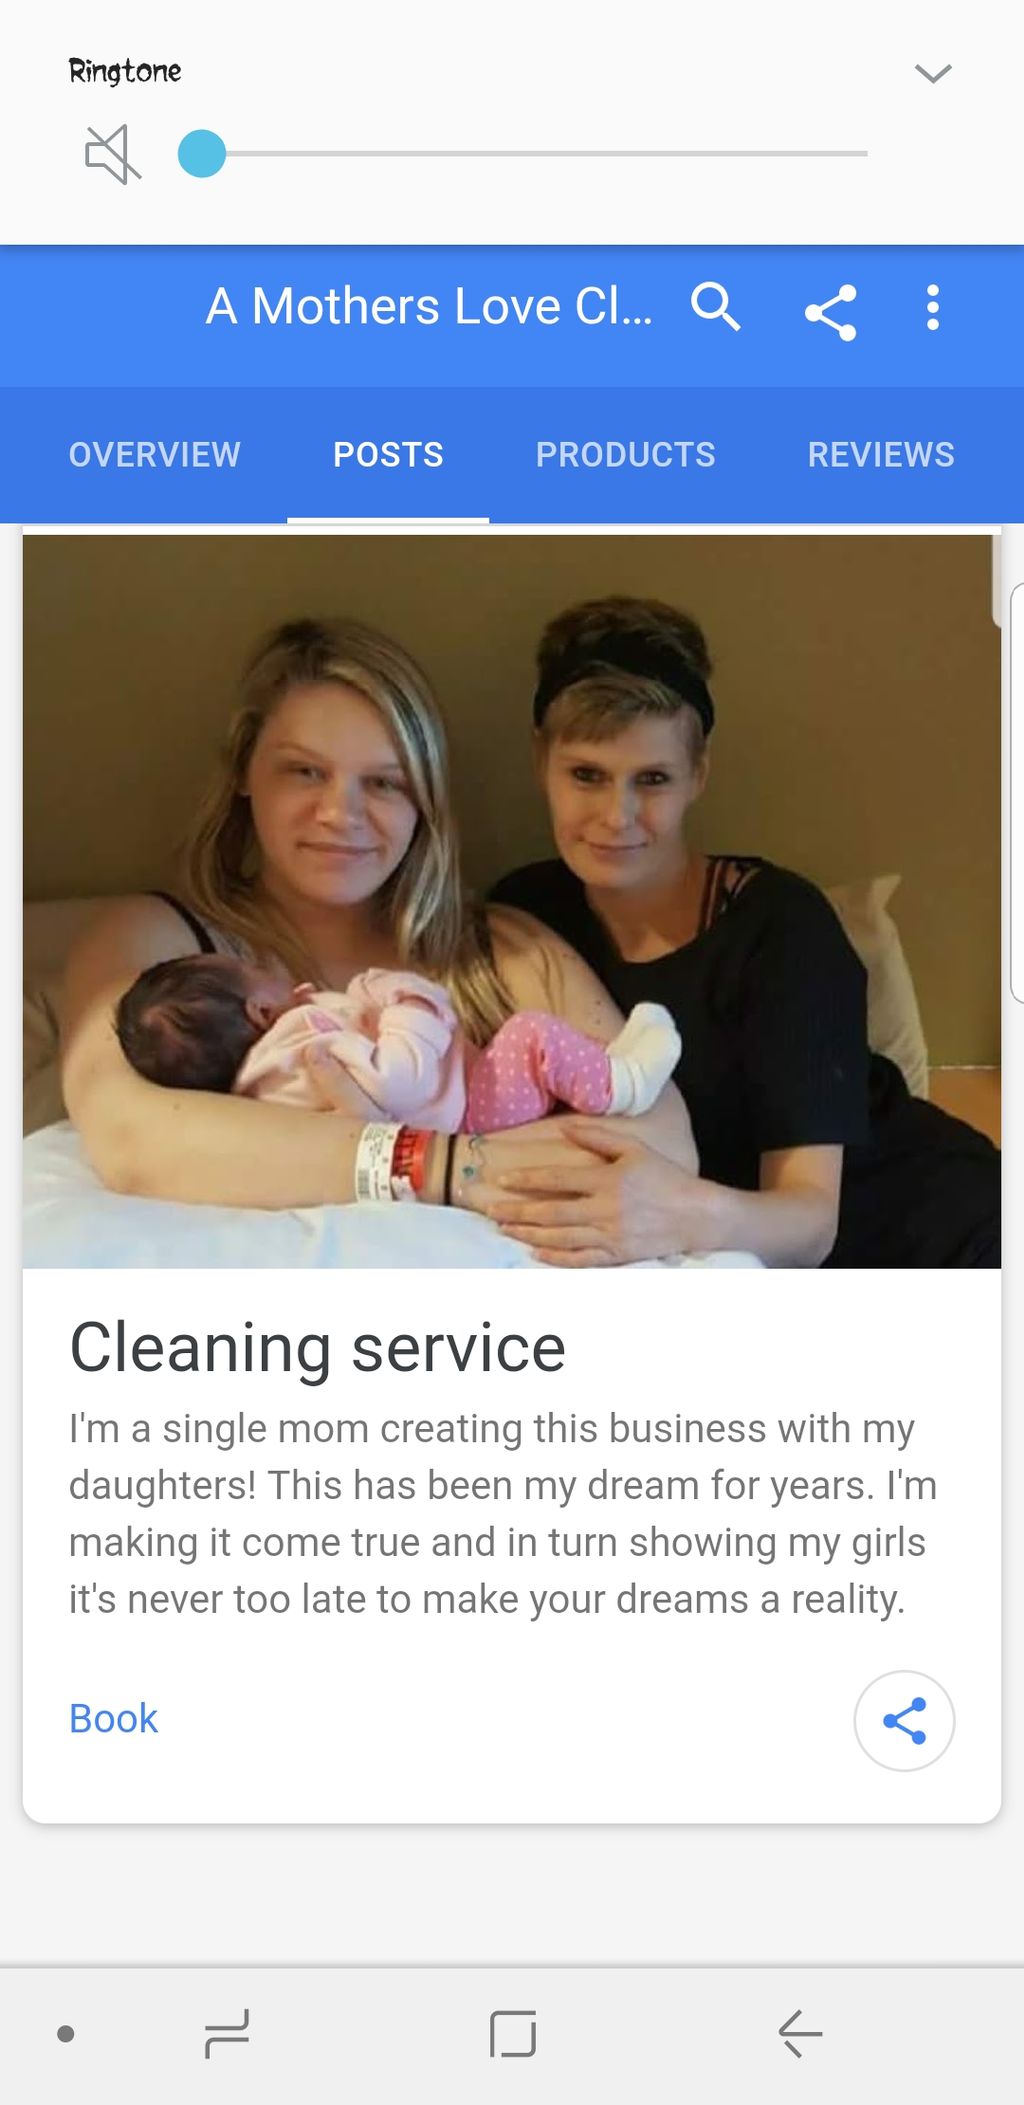 A Mother's Love Cleaning Co